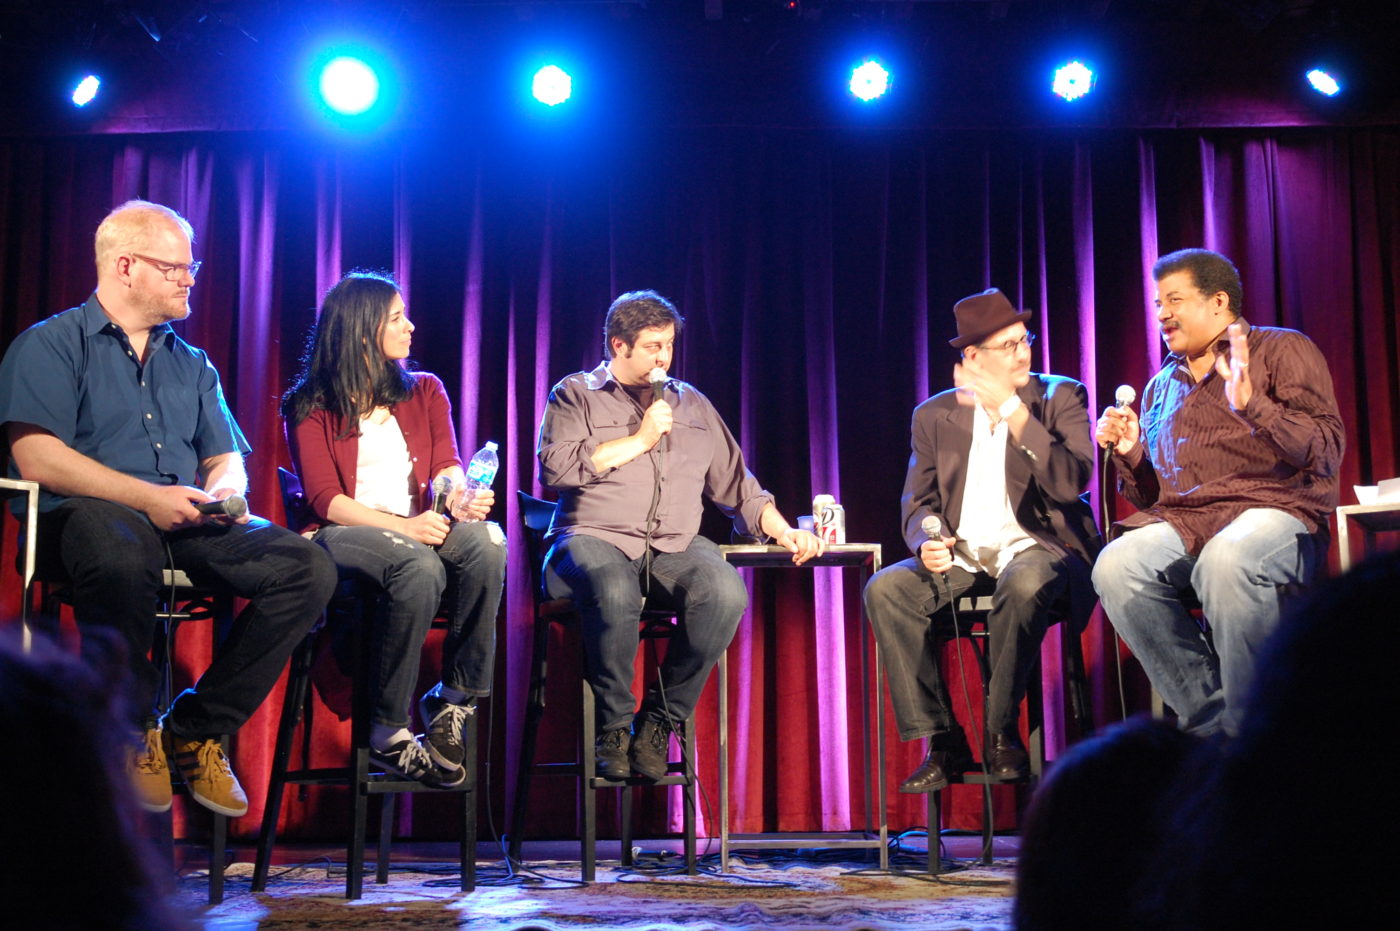 Photo by Stacey Severn of StarTalk Live! onstage at the Bell House, featuring Jim Gaffigan, Sarah Silverman, Eugene Mirman, David Grinspoon, Neil deGrasse Tyson..